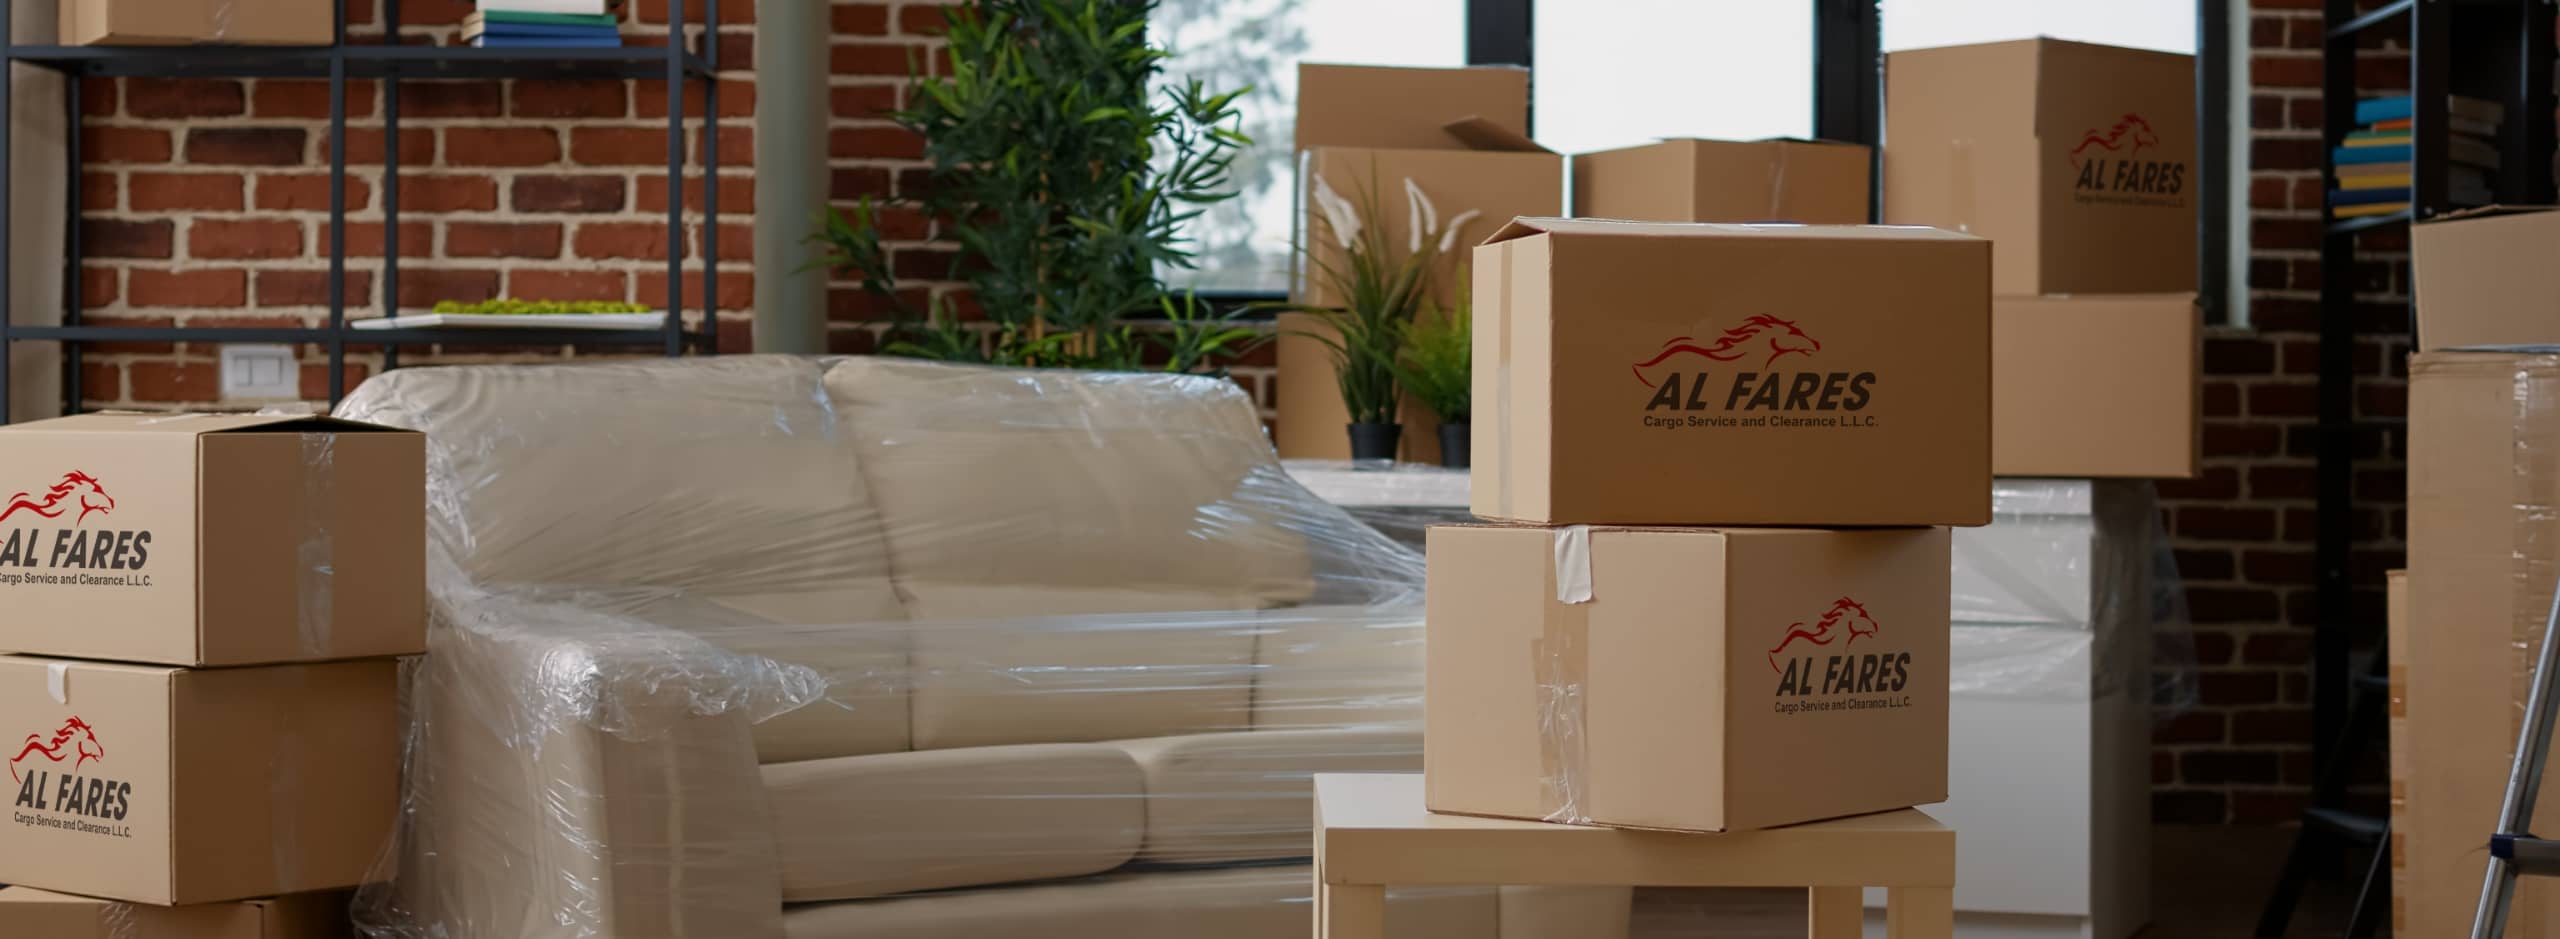 International Moving From The UAE